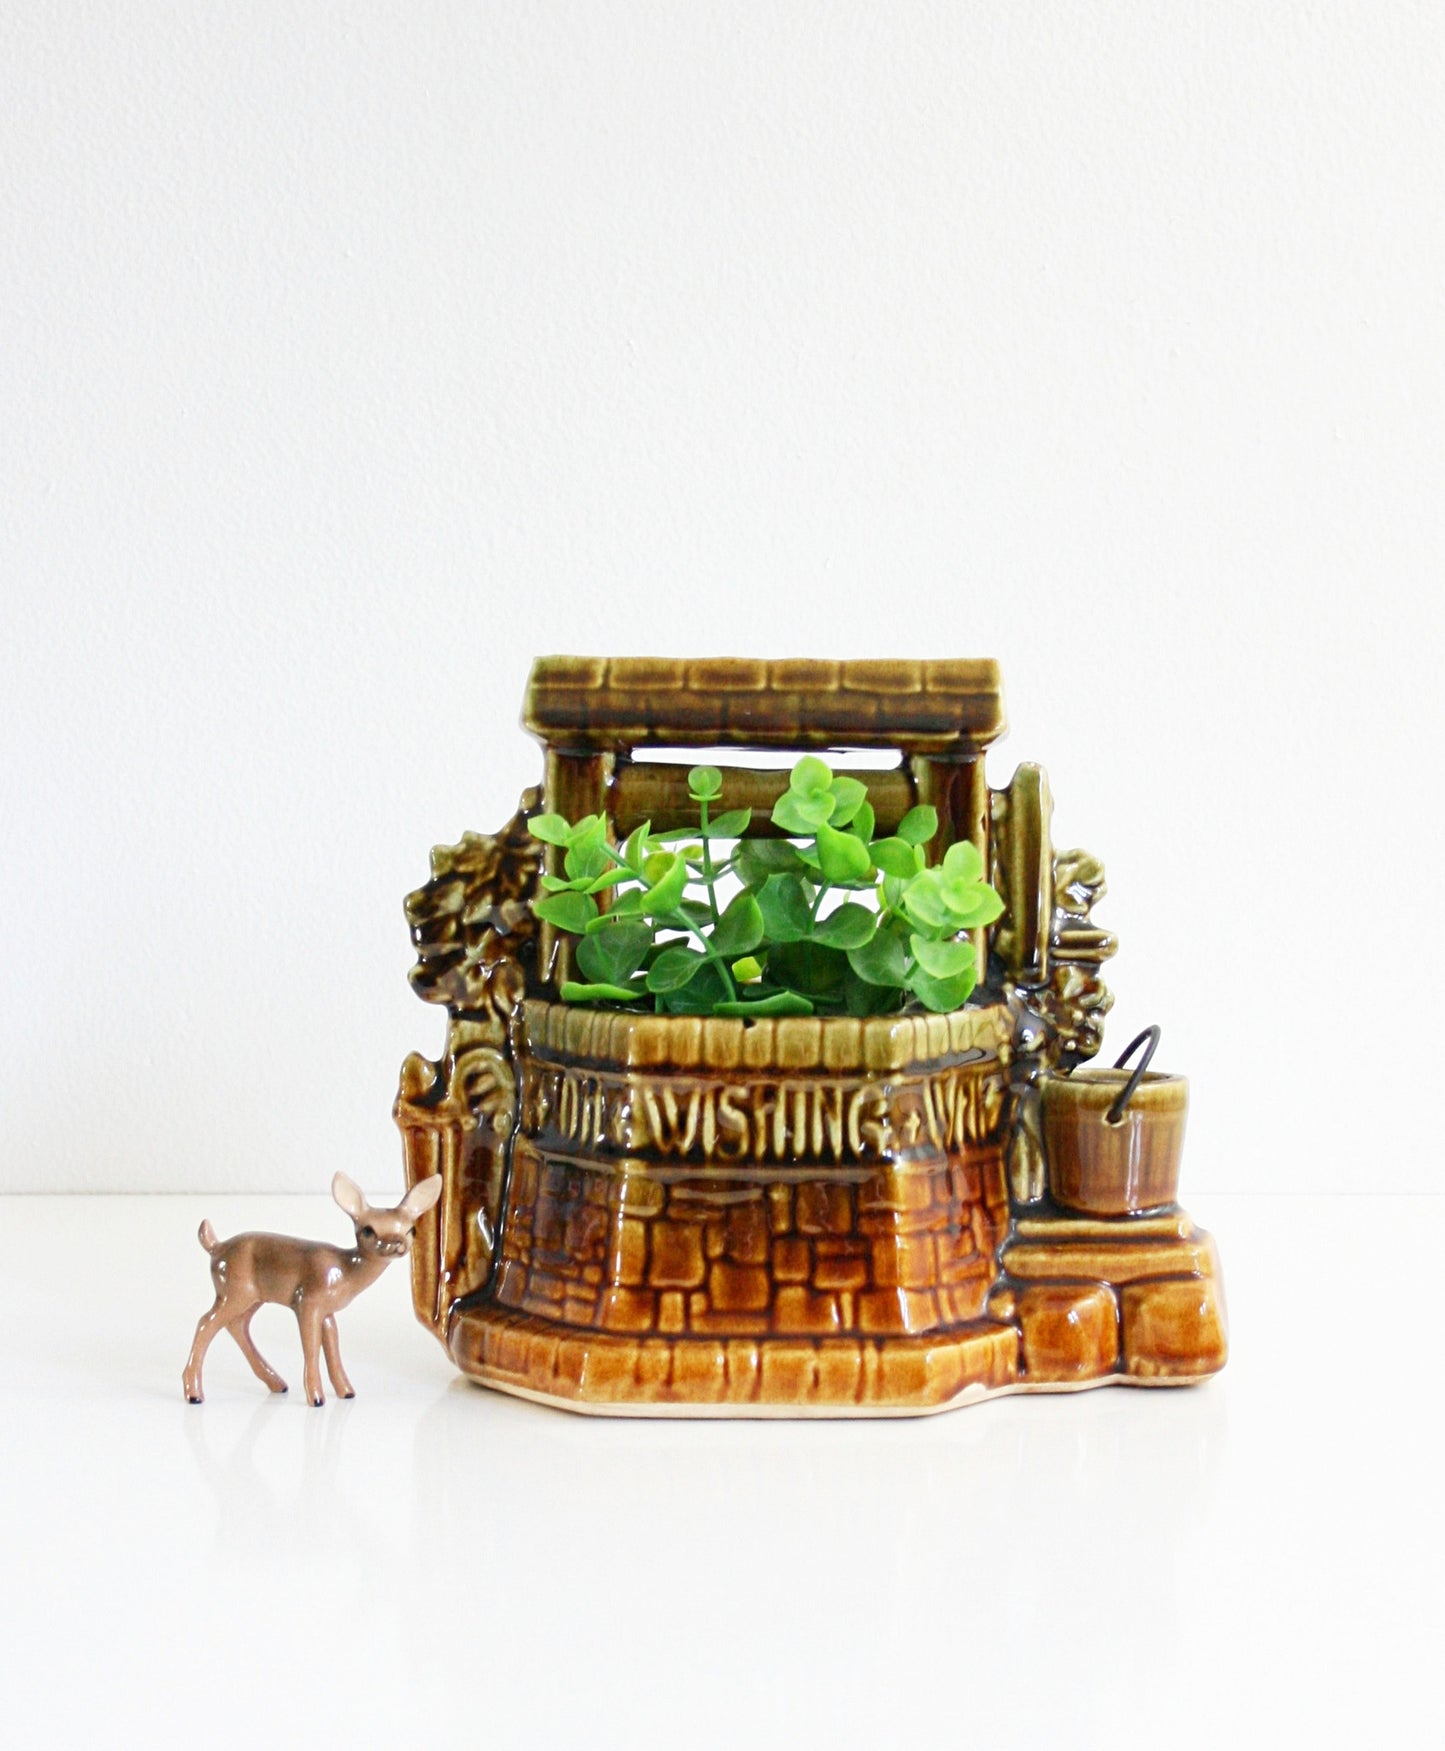 SOLD - Vintage McCoy Wishing Well Planter / Plant Pot